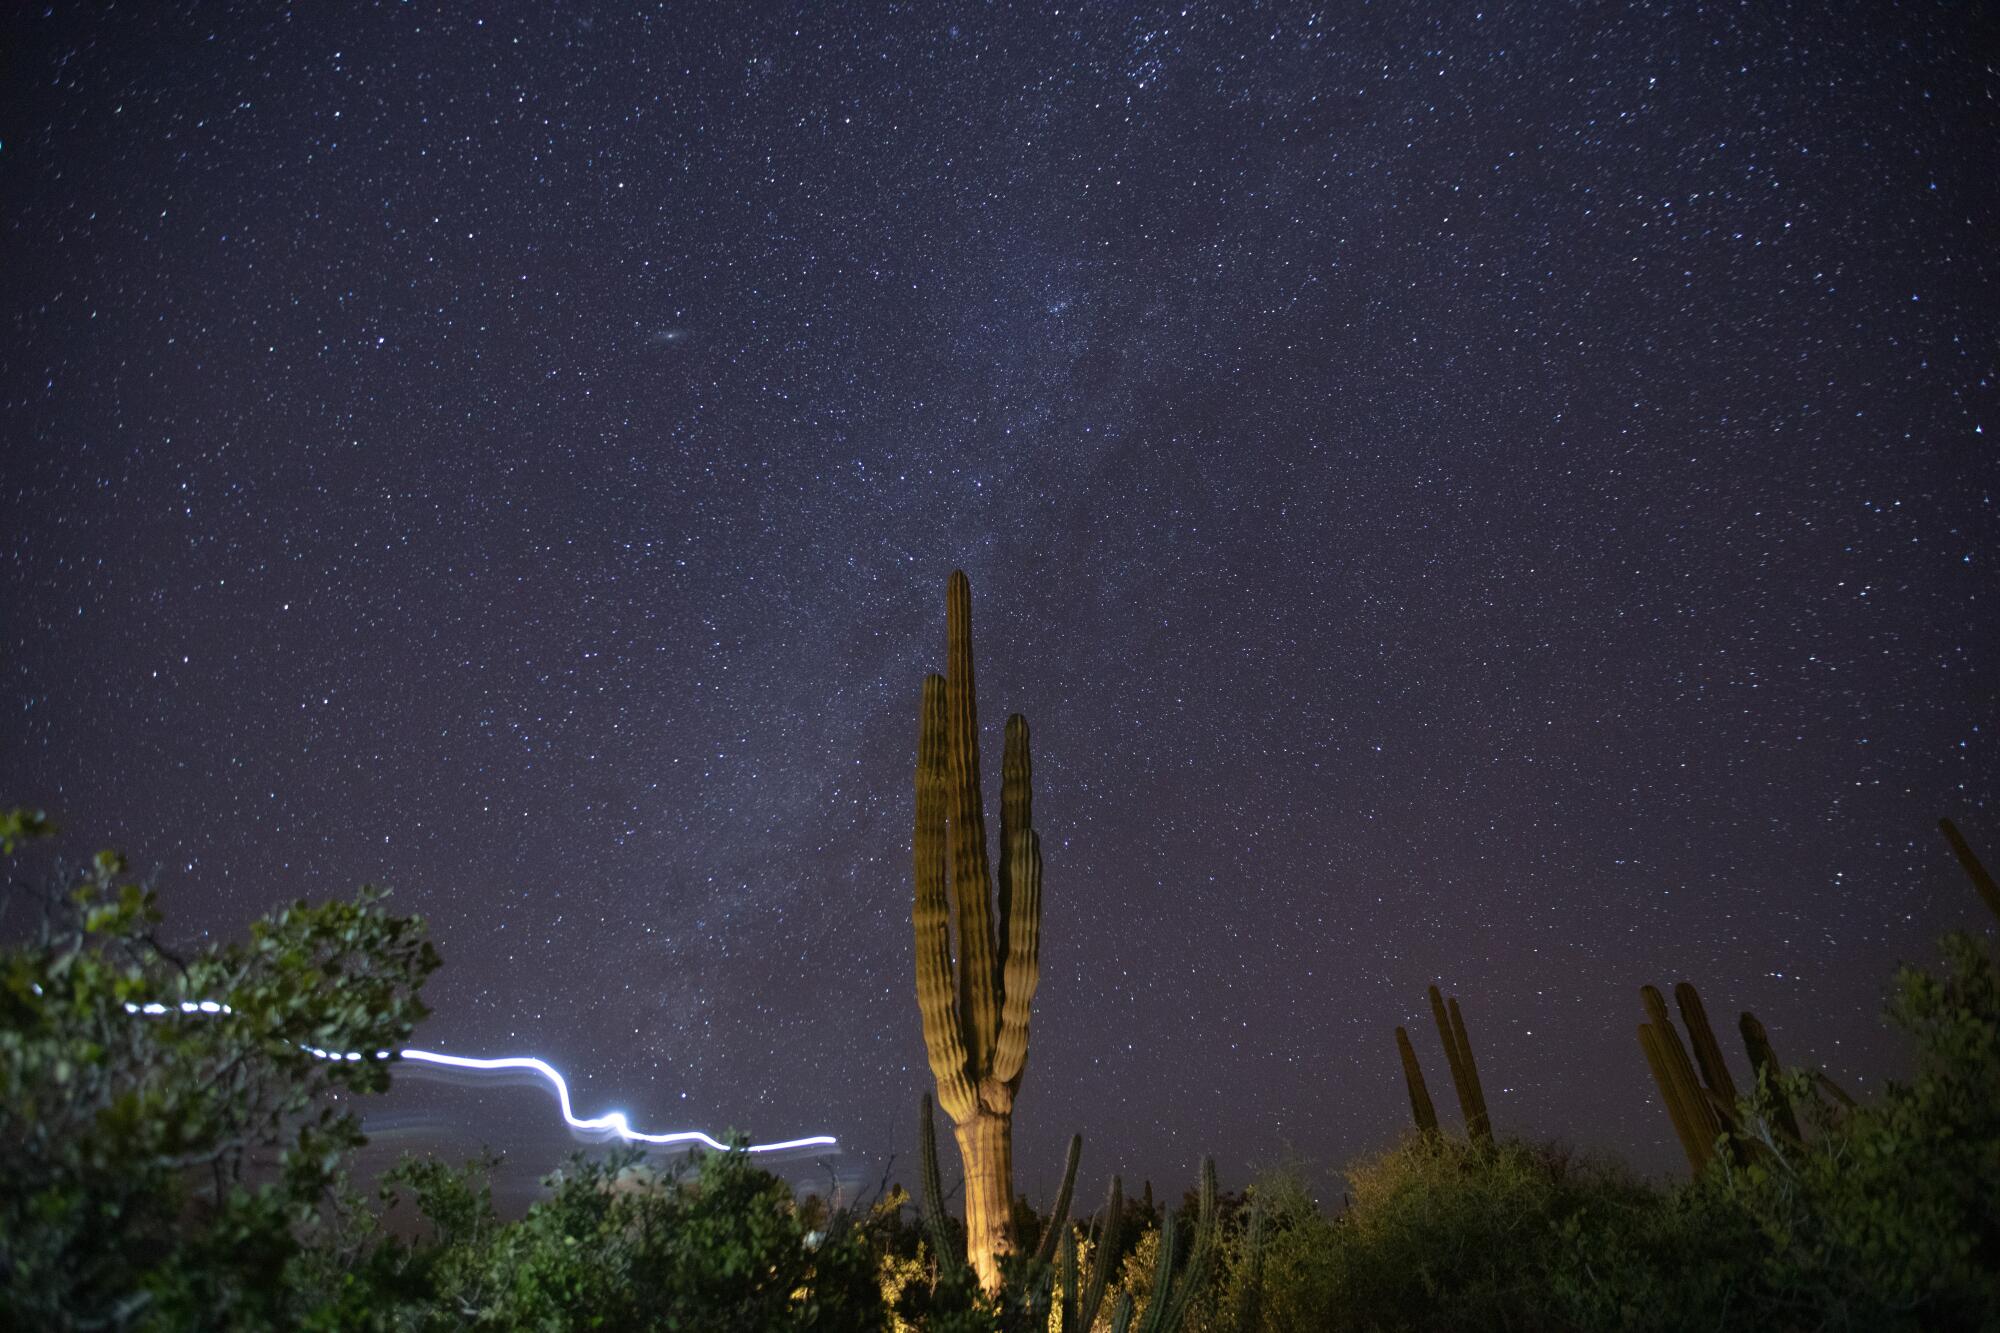 A long-exposure photo showing a cactus against a starlit sky.